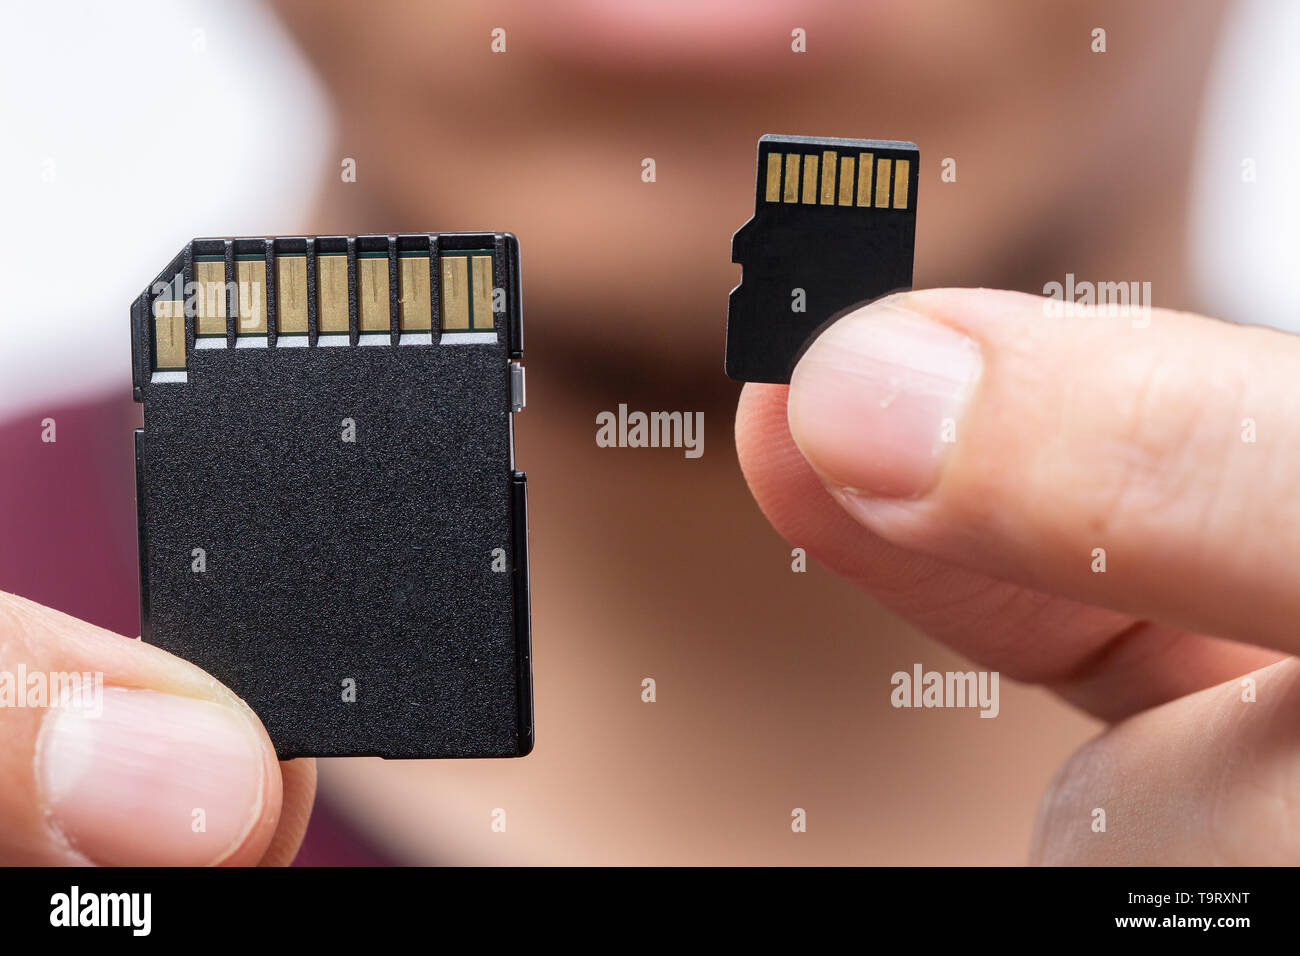 Micro Sd Card High Resolution Stock Photography and Images - Alamy